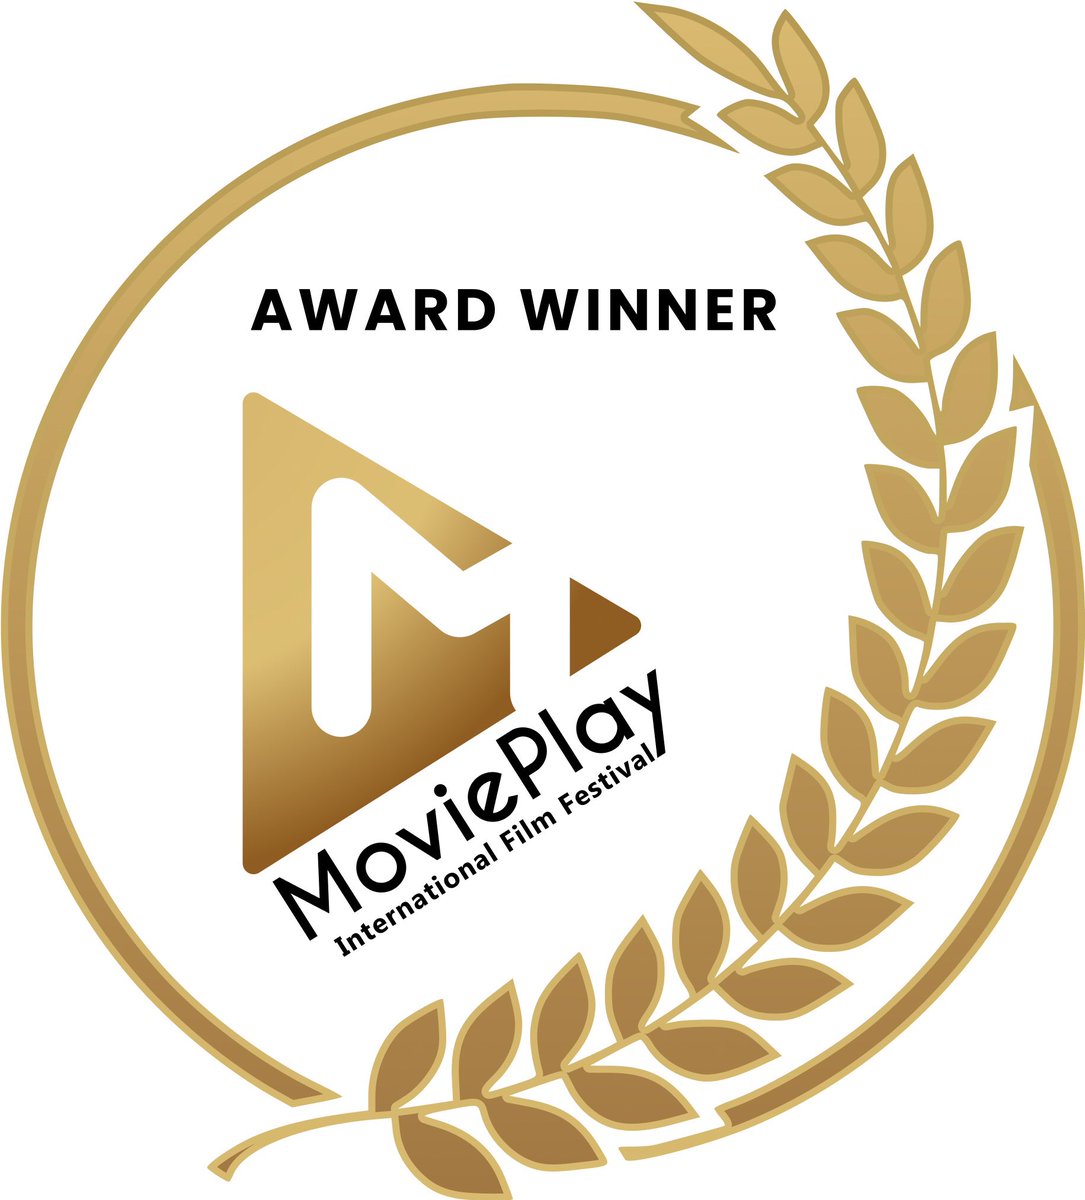 Thank you so much @MoviePlayIFF for naming my script “Blackness of Space, Whiteness of Bones” as their Award Winner - Best Screenplay Drama. #screenwriters #screenplays #screenwriting #womenwriters #femalewriters #powerfulstories #femalevoices #womenover50 #womeninfilmandtv